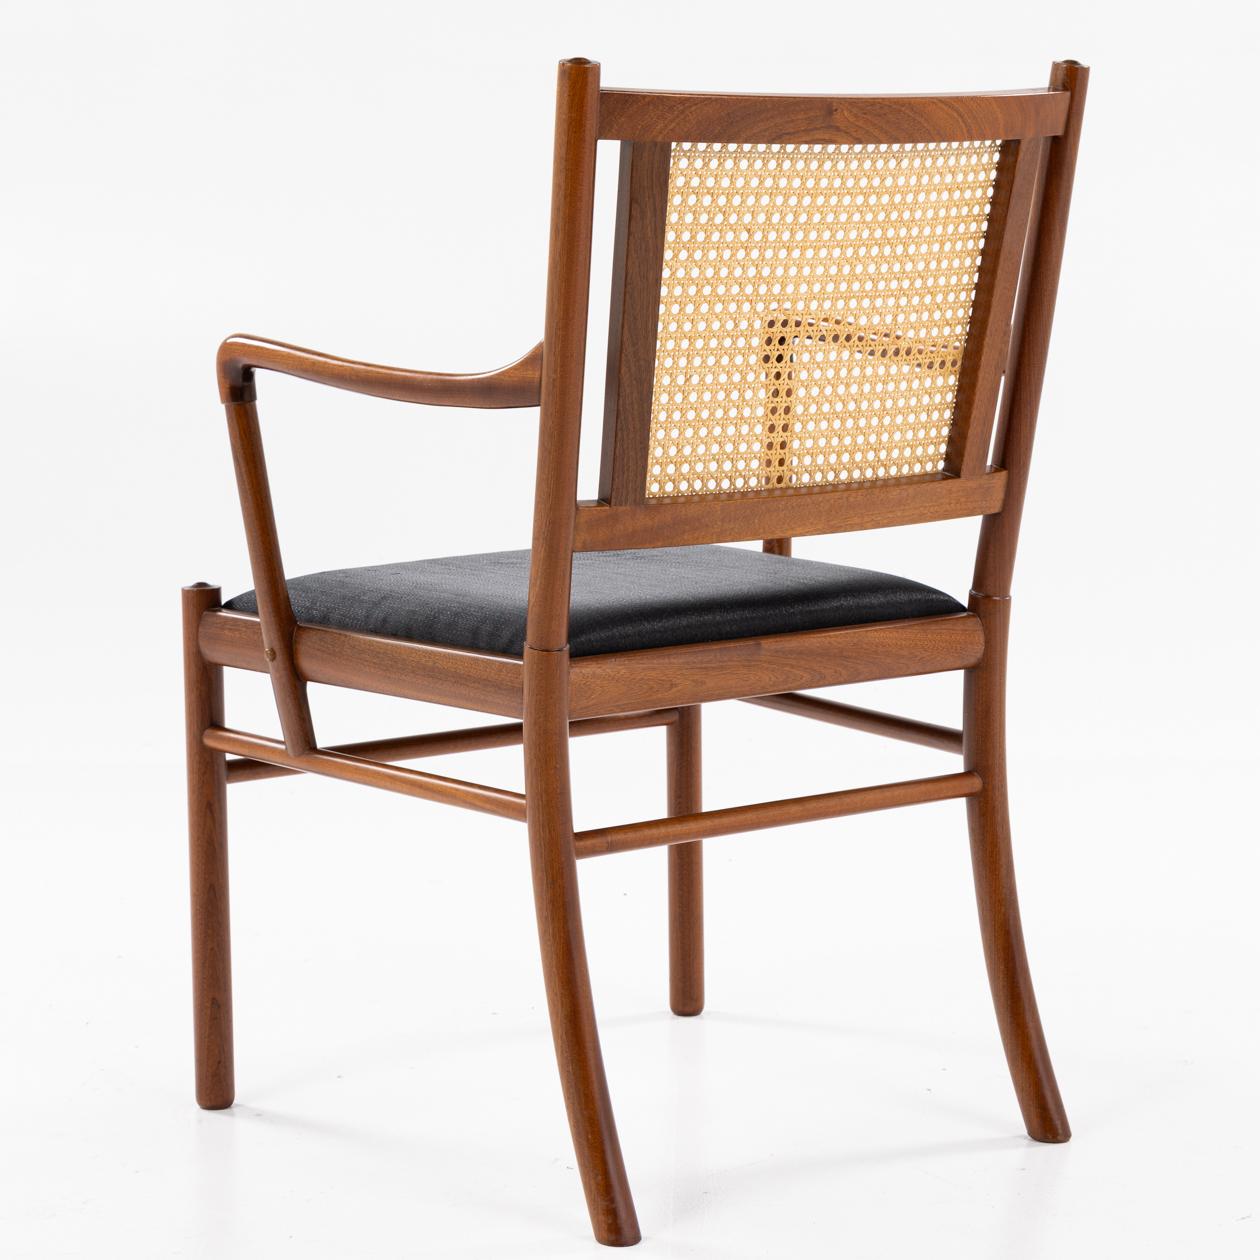 PJ 301 - Armchair in mahogany, French wicker and black horsehair seat. le Wanscher / P.J Furniture